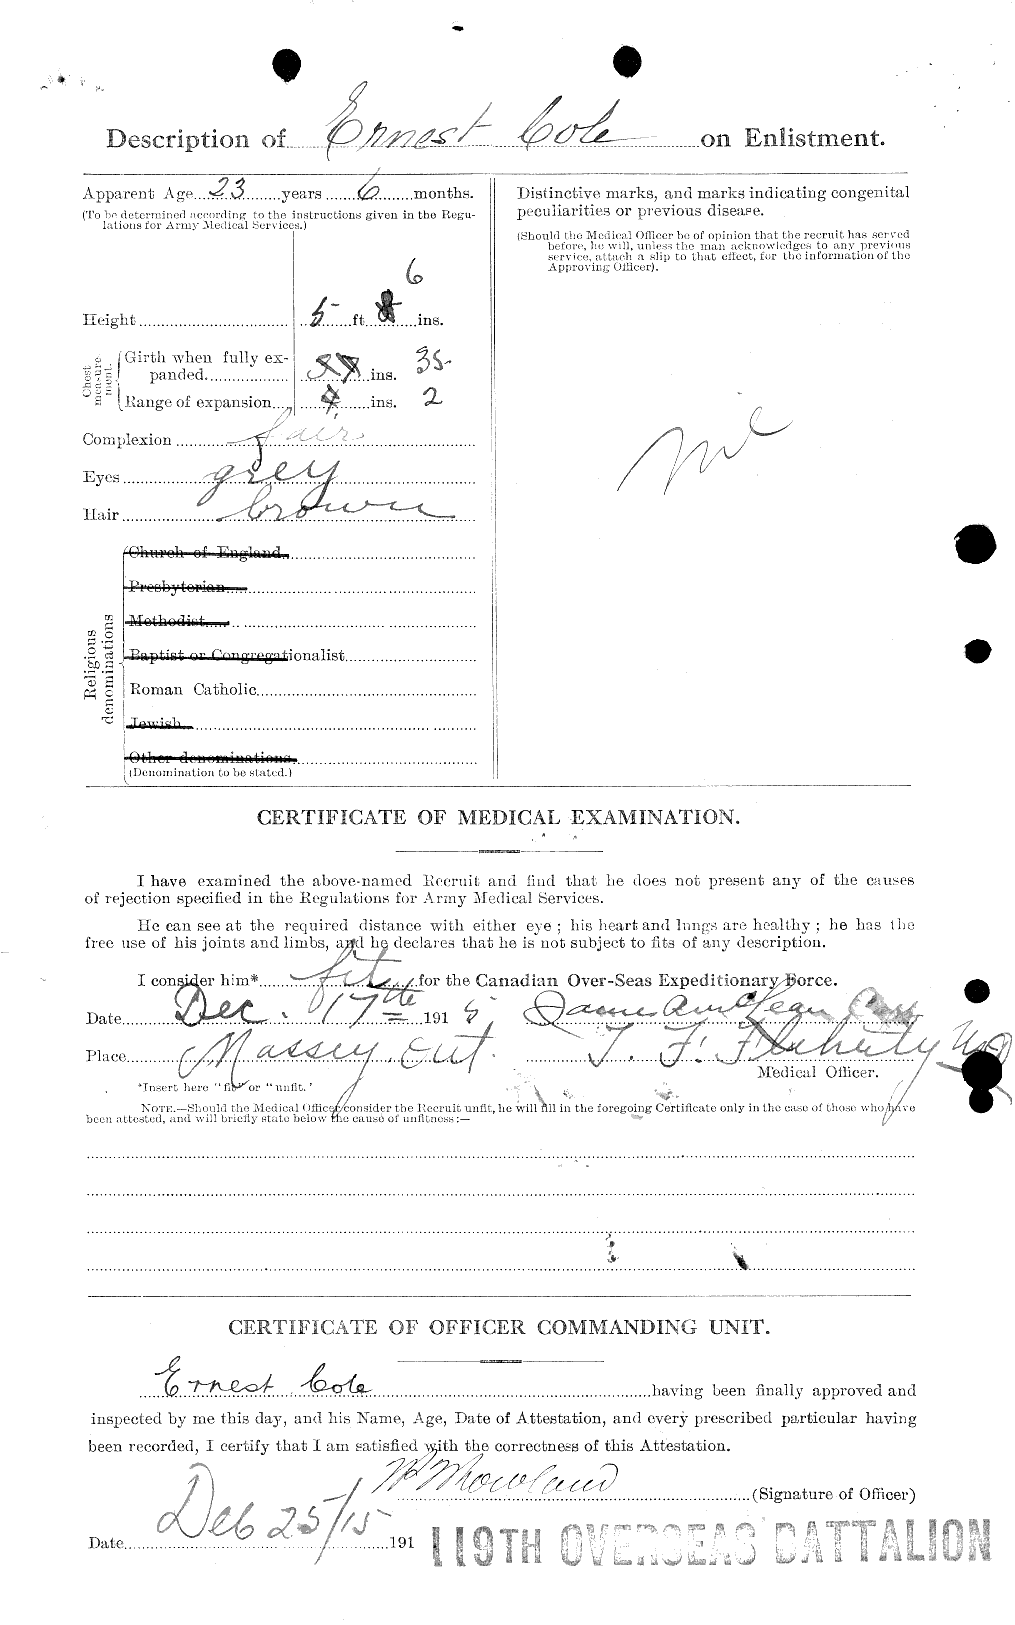 Personnel Records of the First World War - CEF 027696b